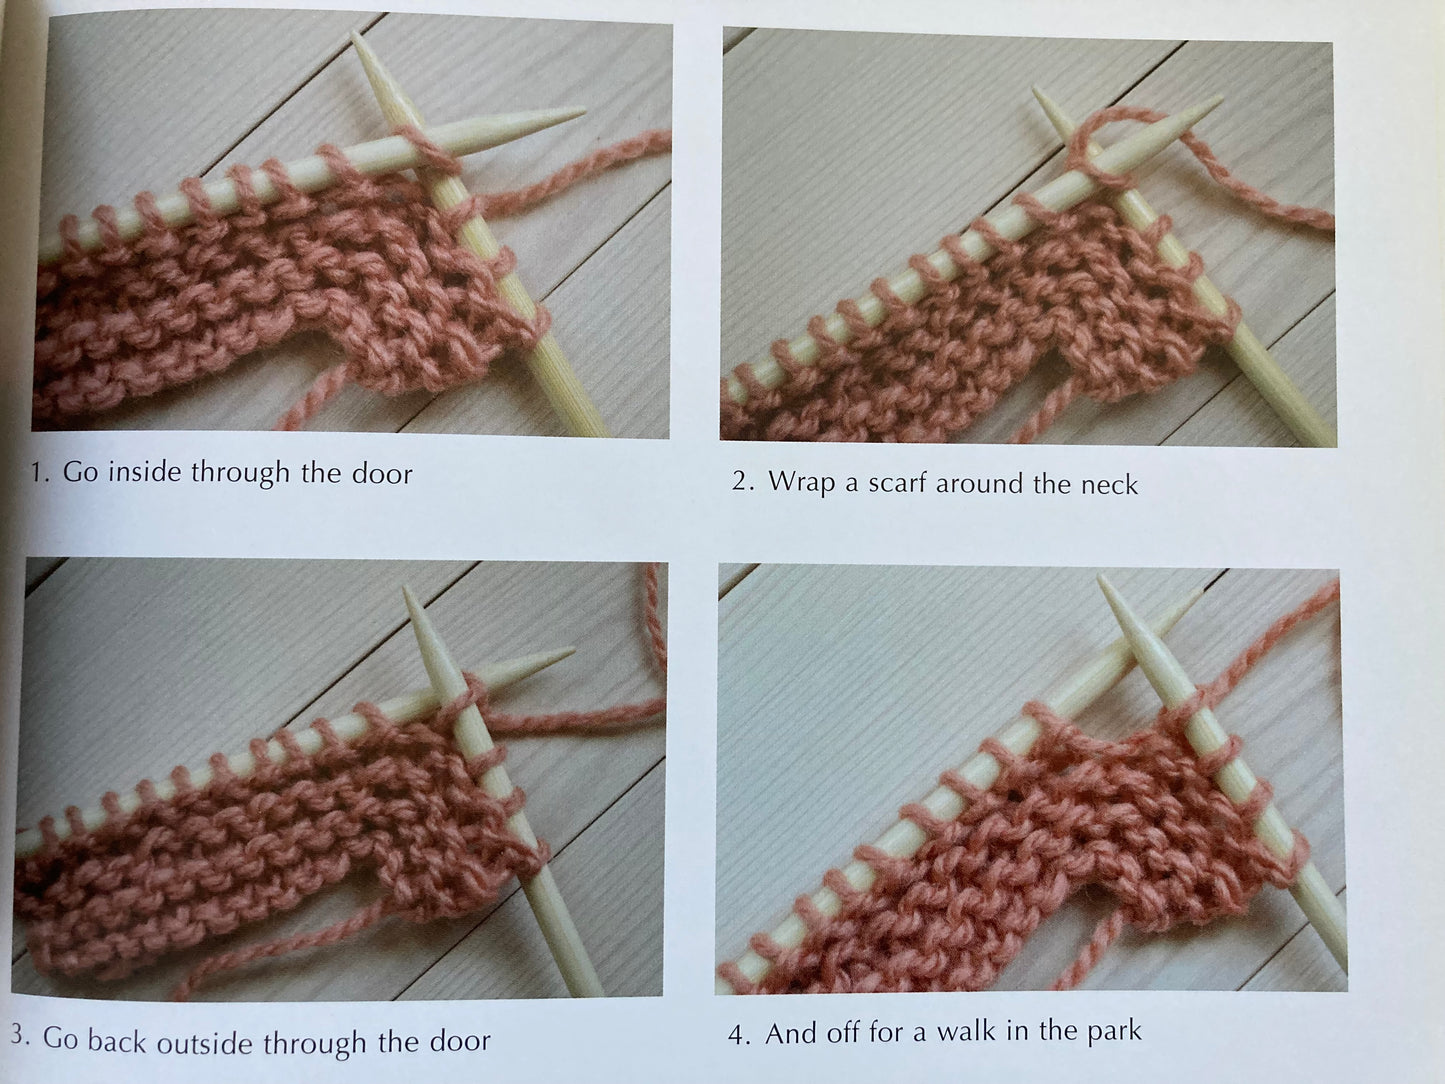 Crafting Resource Book - KNIT TOGETHER, SHARE TOGETHER